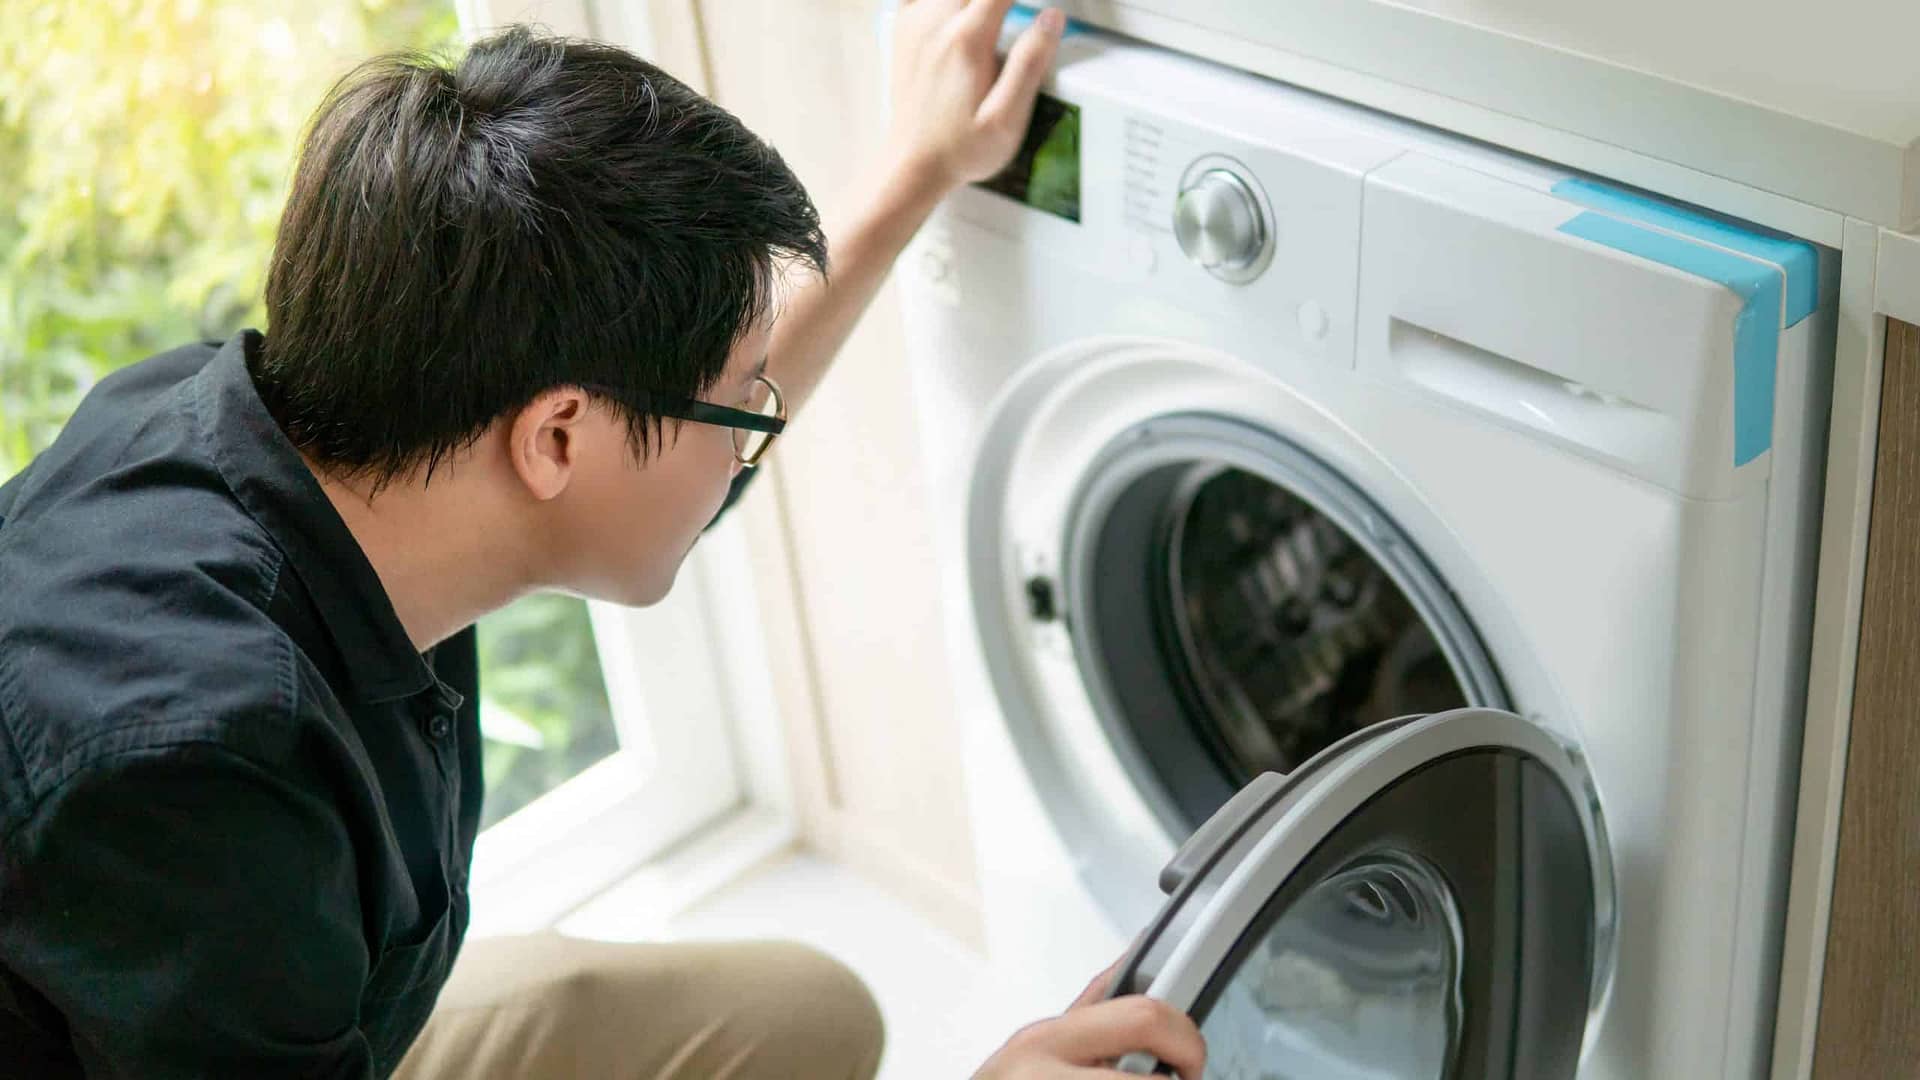 Dryer Blowing Cold Air: 8 Easy Ways to Fix It Now